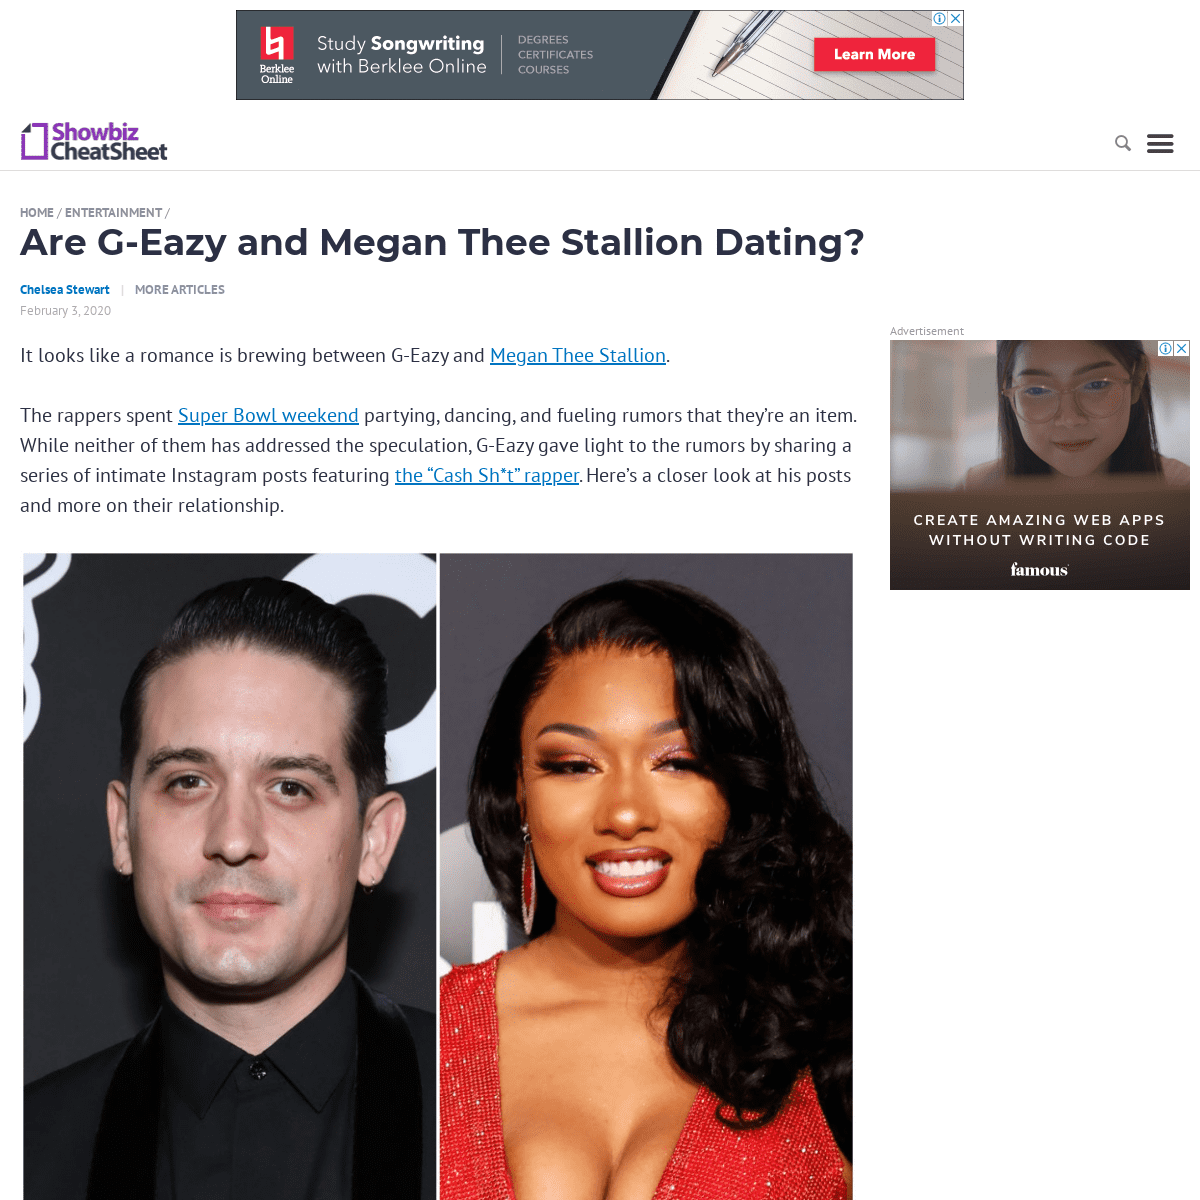 A complete backup of www.cheatsheet.com/entertainment/are-g-eazy-and-megan-thee-stallion-dating.html/